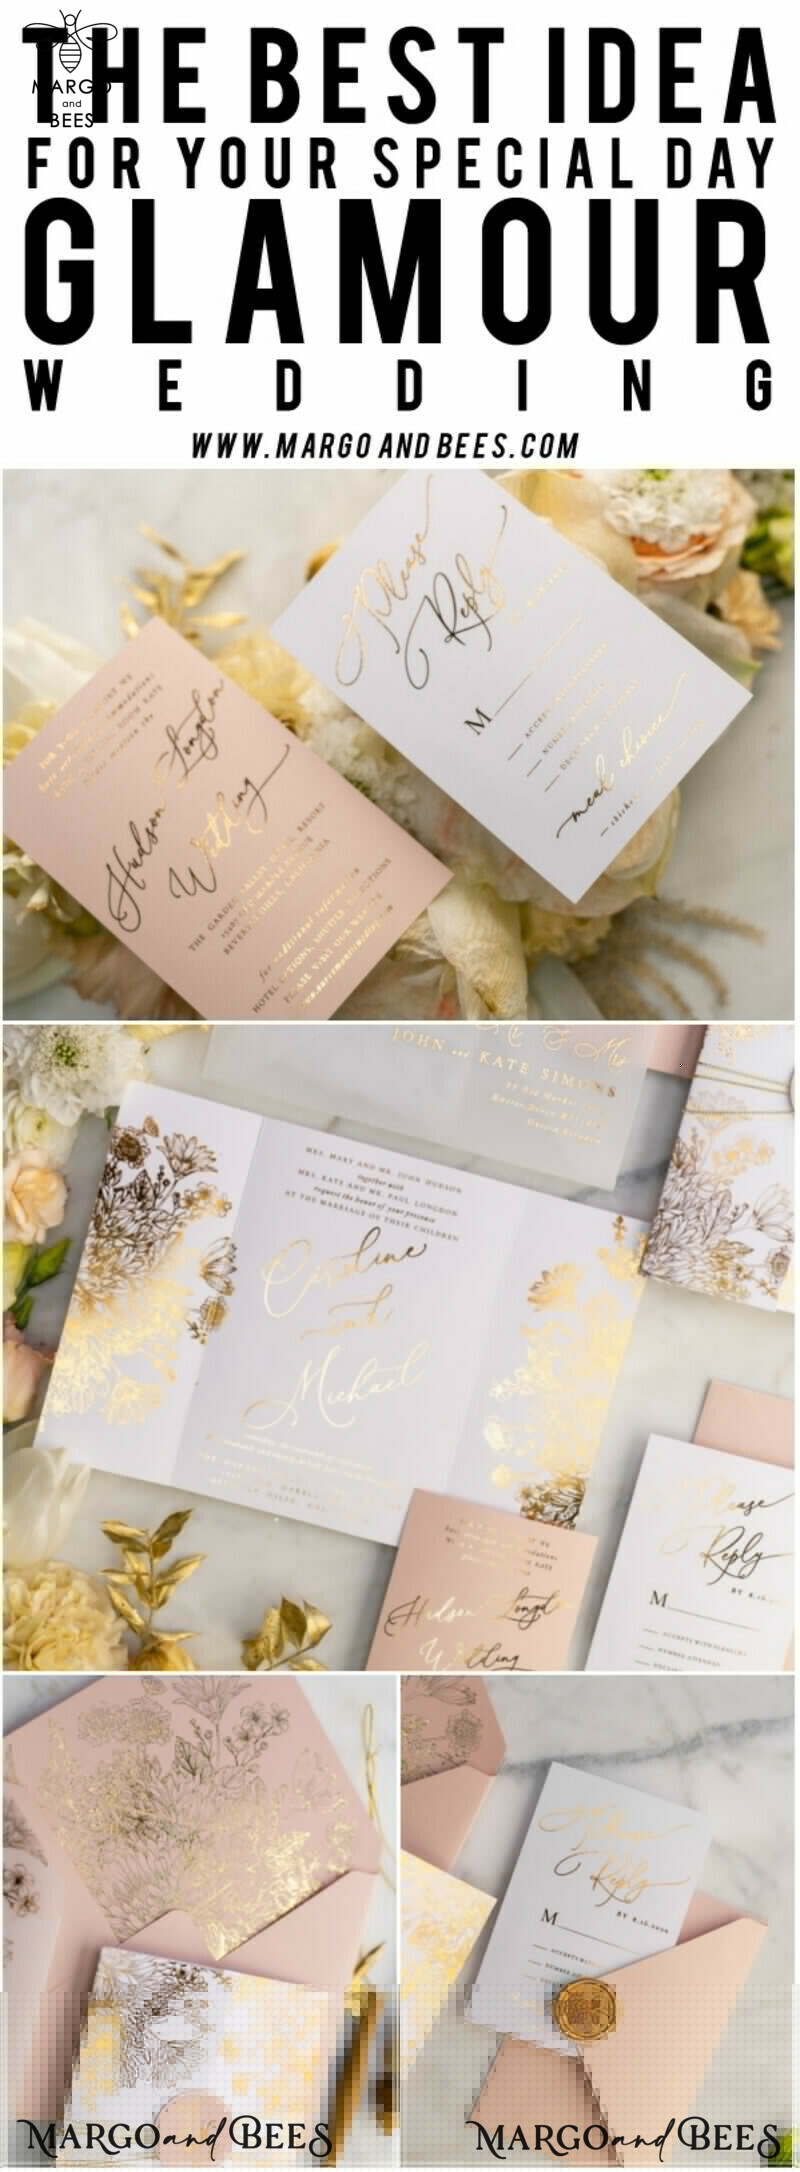 Exquisite Arabic Golden Wedding Invitations with Glamour Gold Foil for a Romantic Blush Pink Affair: Bespoke Indian Wedding Stationery-45